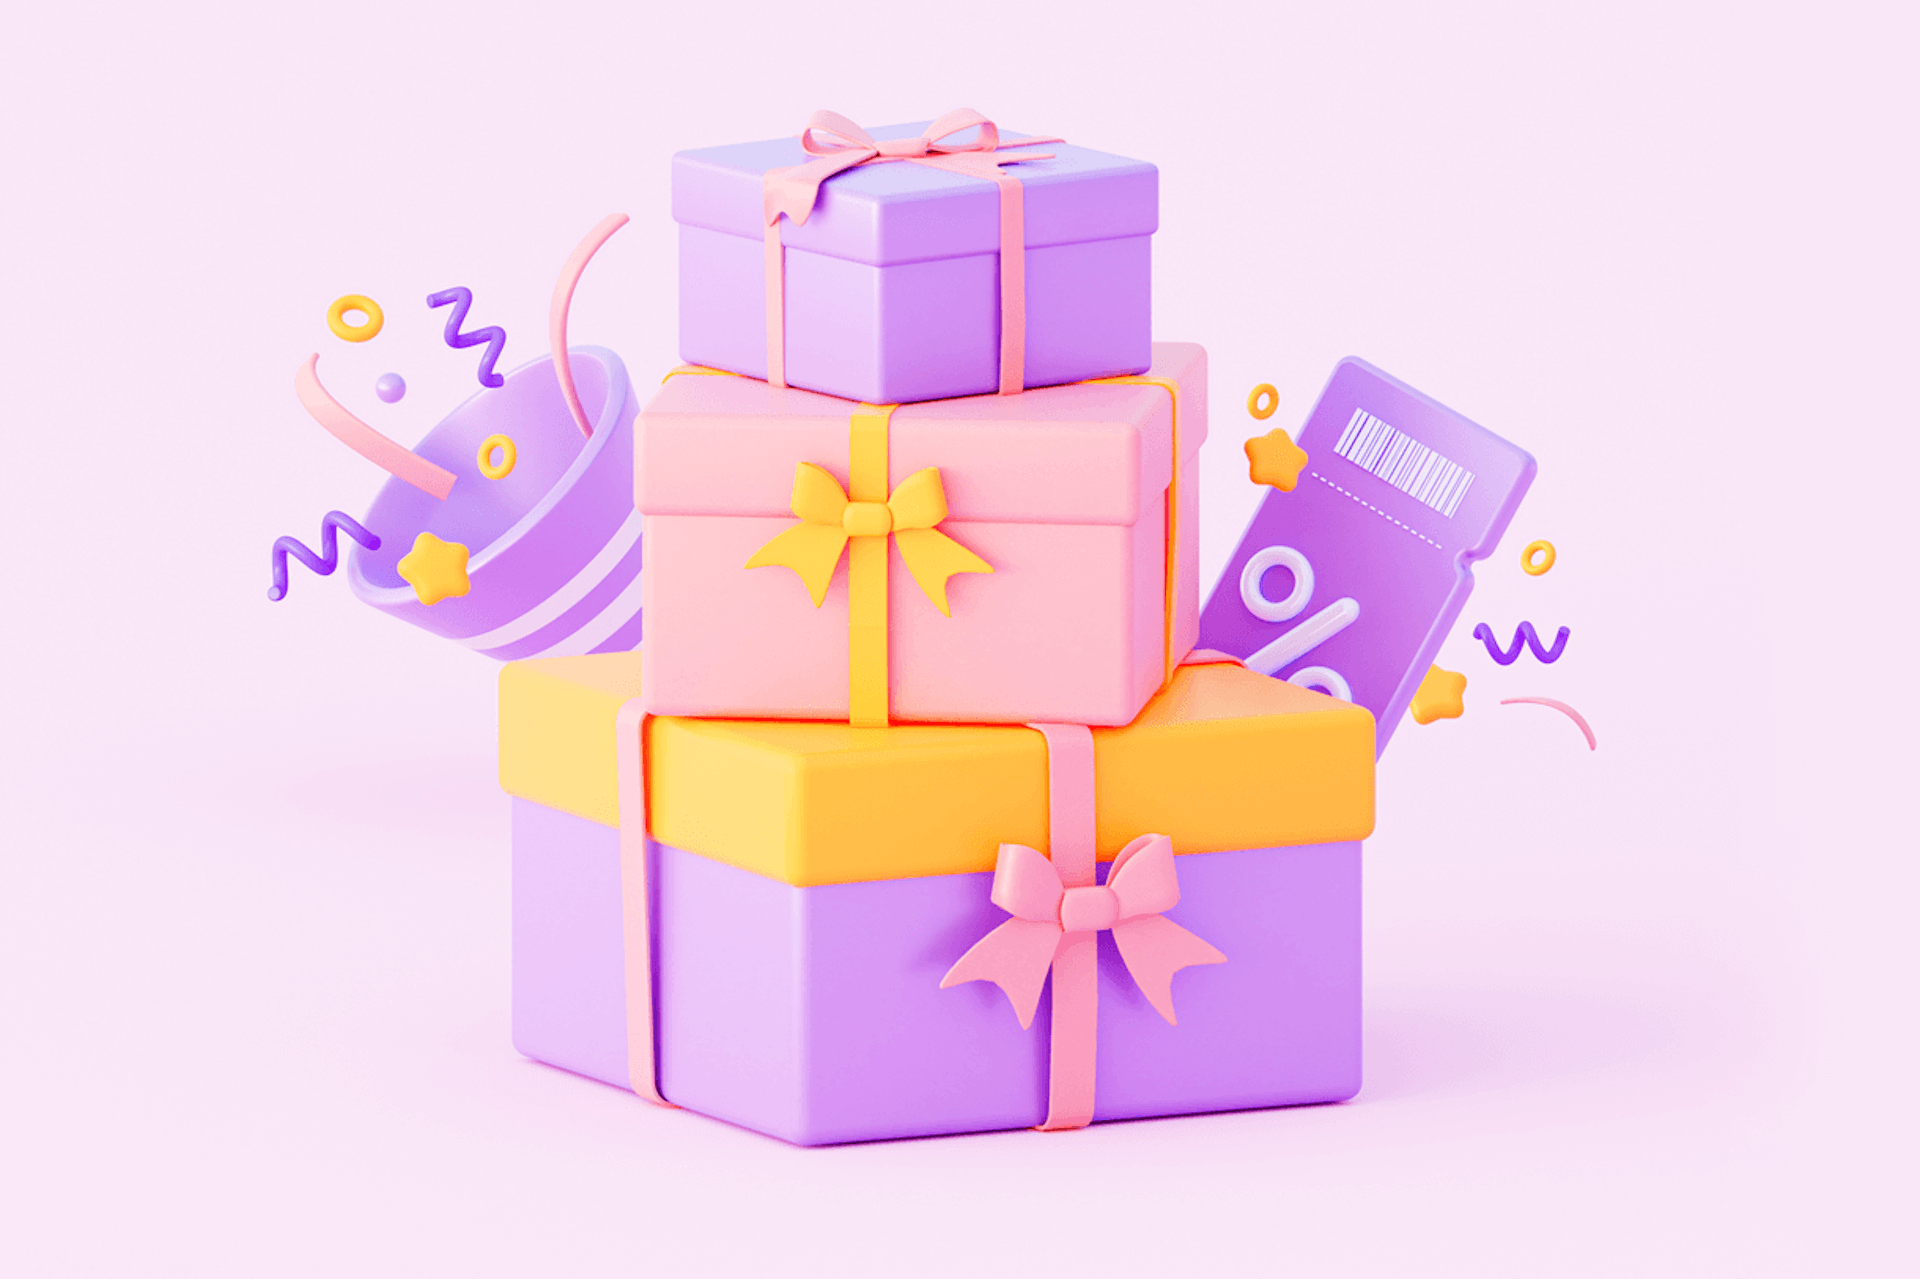 3D Illustration of gifts and vouchers within an influencer loyalty program